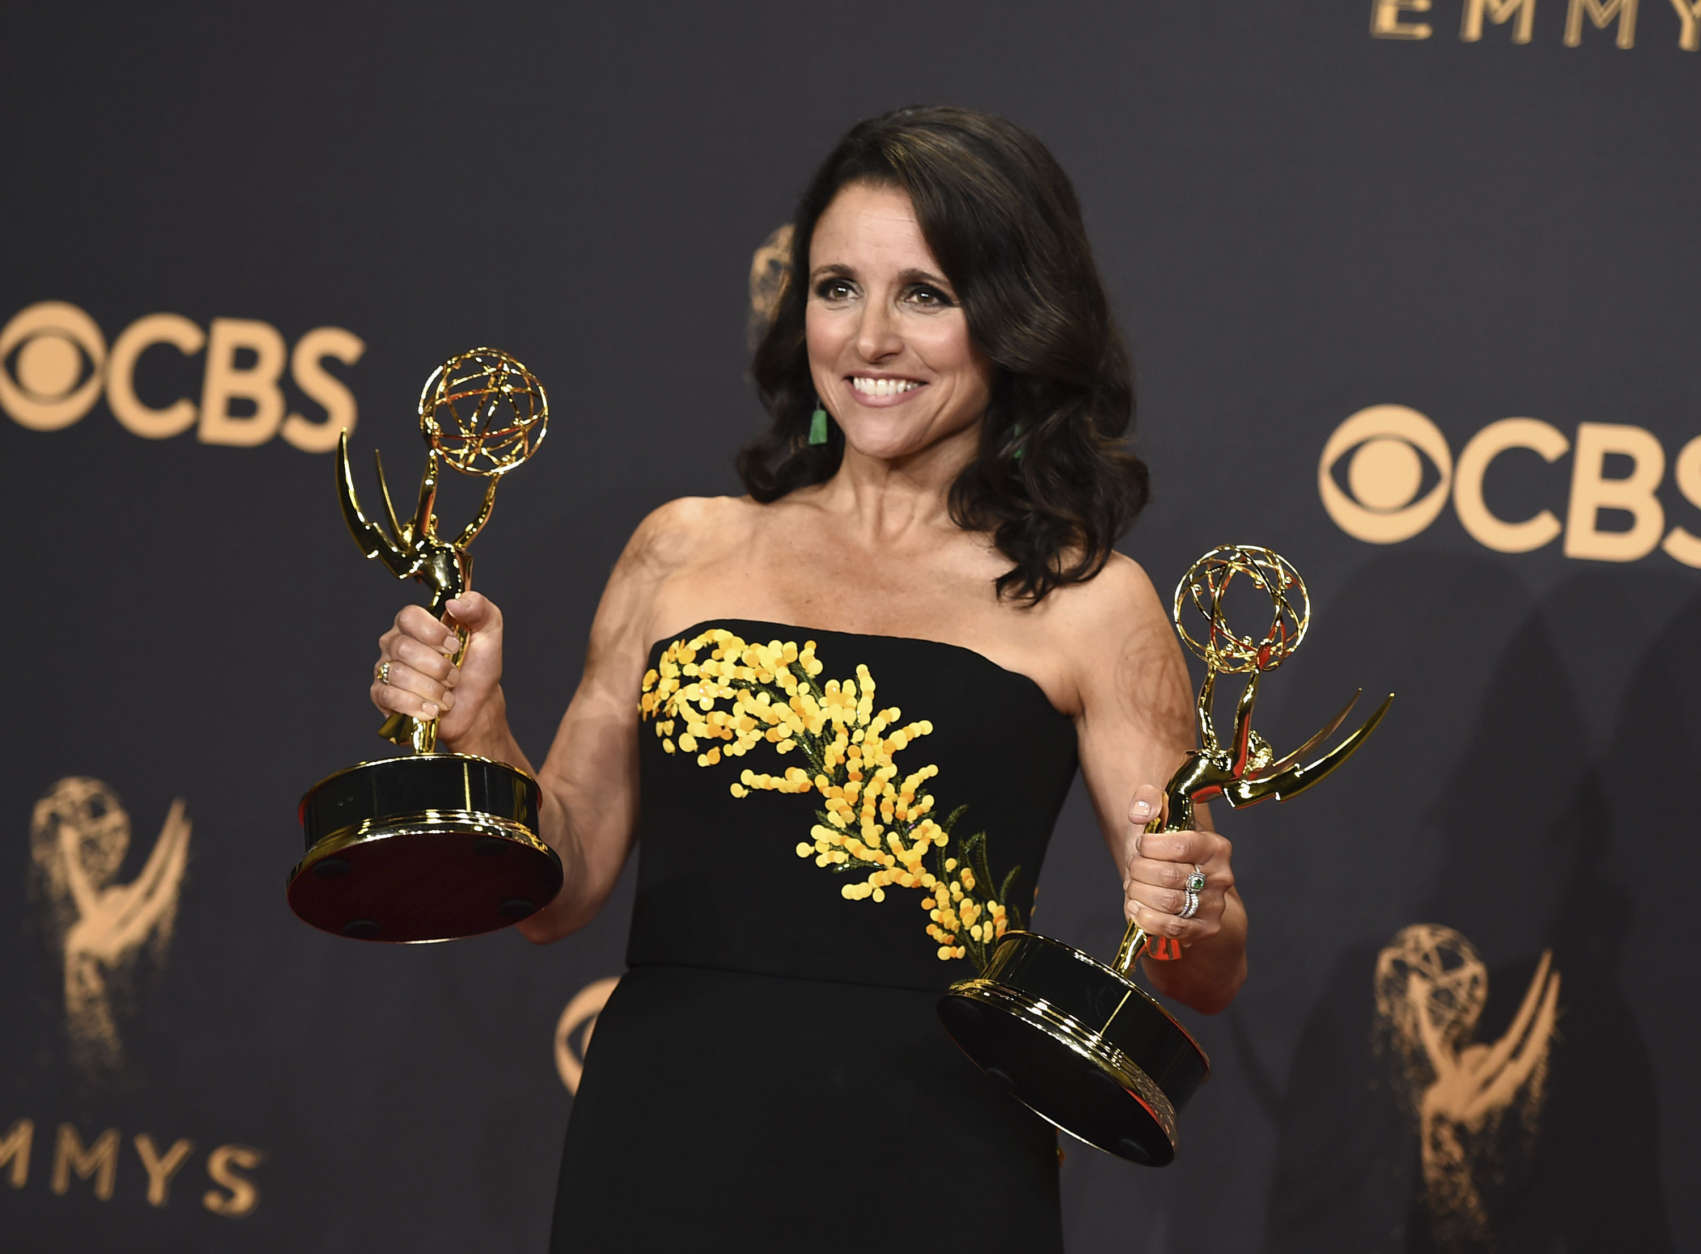 Julia Louis-Dreyfus poses in the press room with her awards for outstanding lead actress in a comedy series and outstanding comedy series for "Veep" at the 69th Primetime Emmy Awards on Sunday, Sept. 17, 2017, at the Microsoft Theater in Los Angeles. (Photo by Jordan Strauss/Invision/AP)